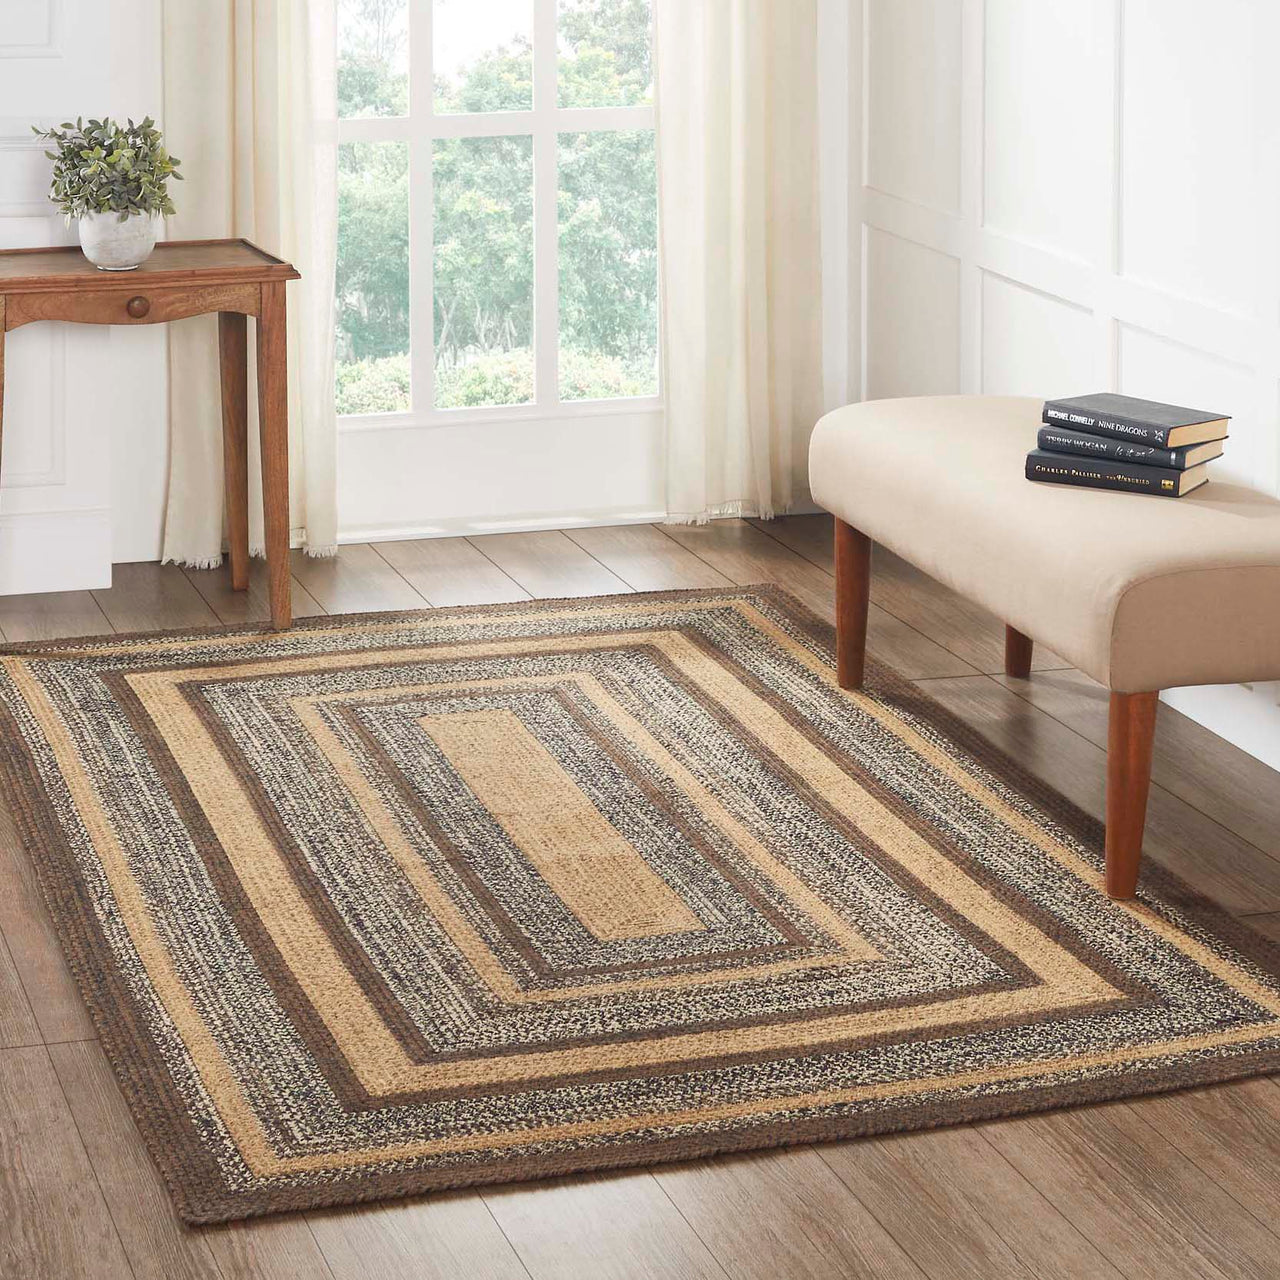 Espresso Jute Braided Rug Rect with Rug Pad 5'x8' VHC Brands